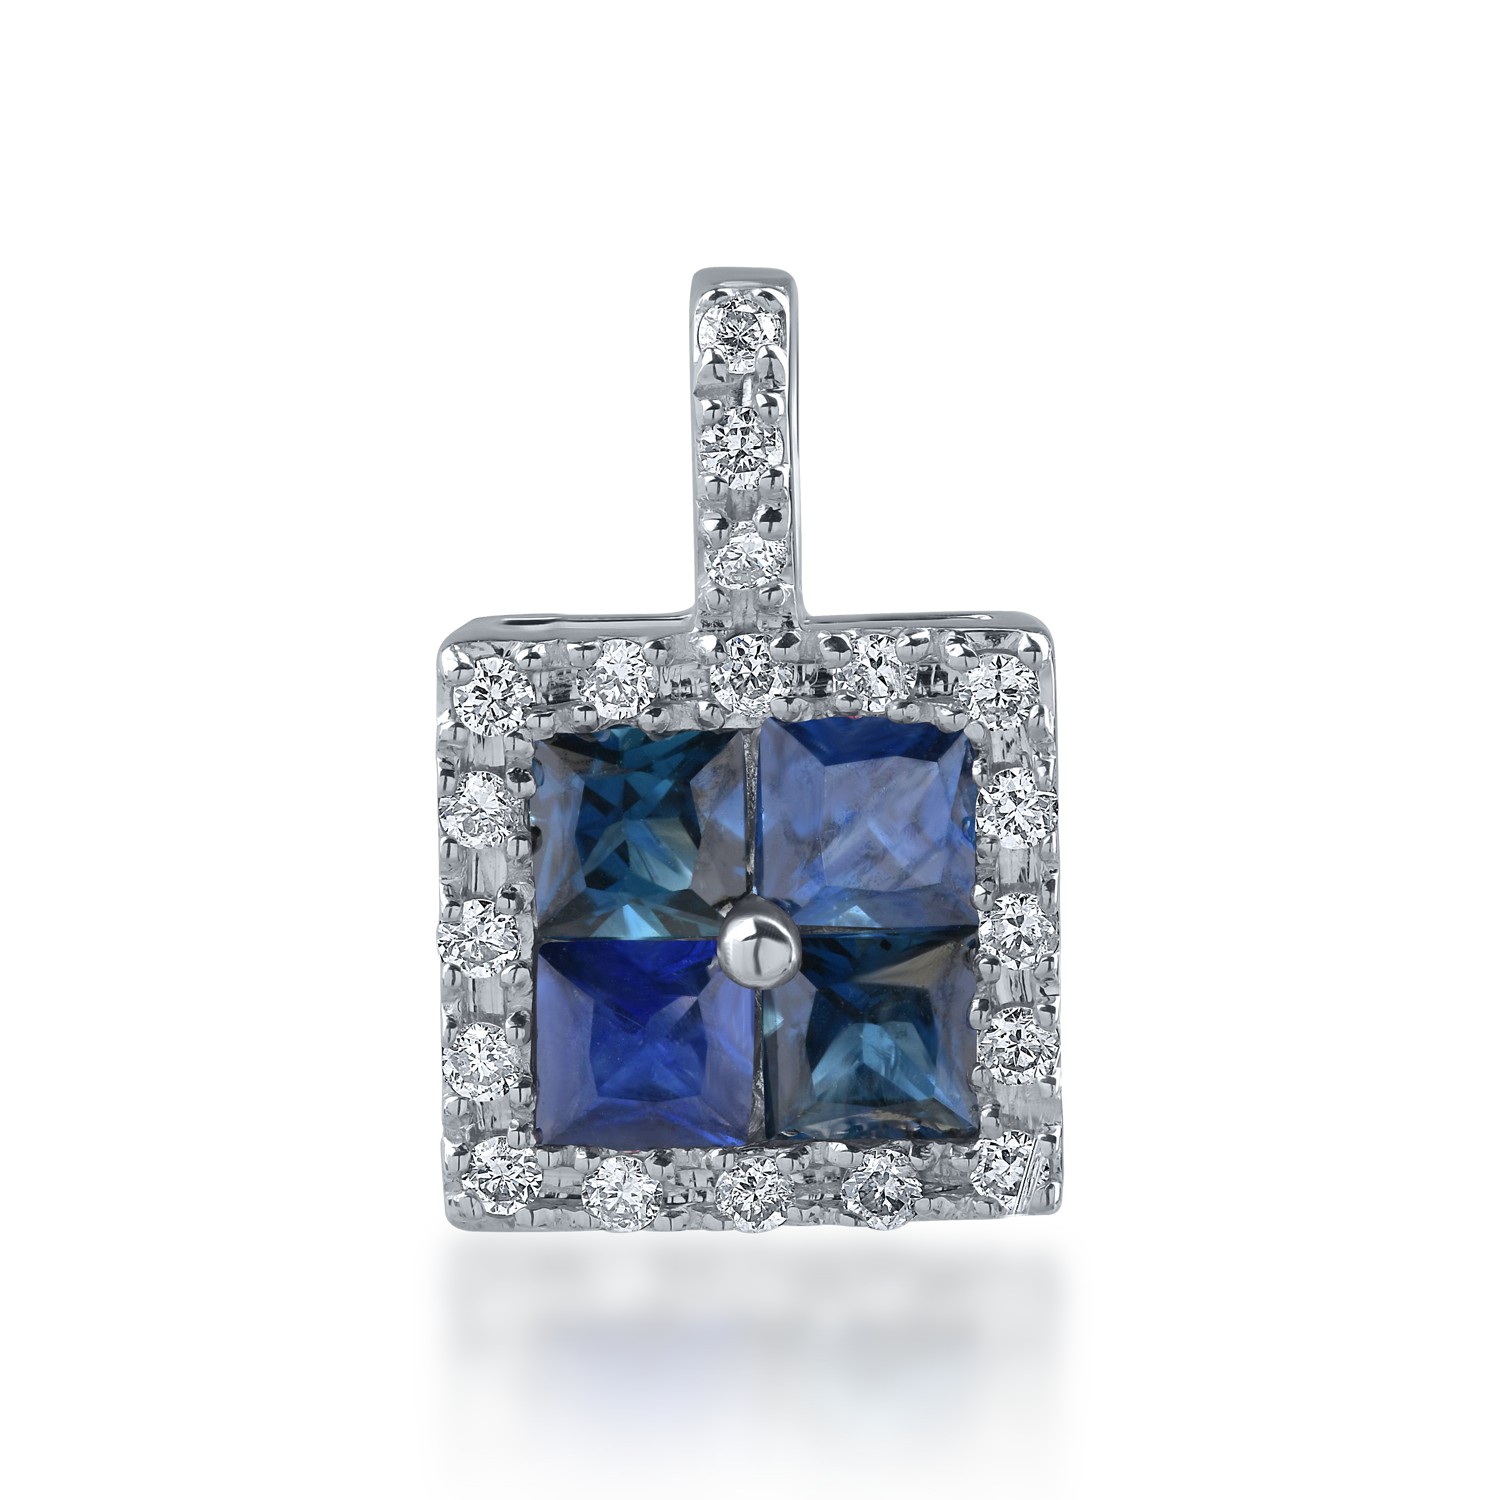 White gold pendant with 0.82ct sapphires and 0.12ct diamonds